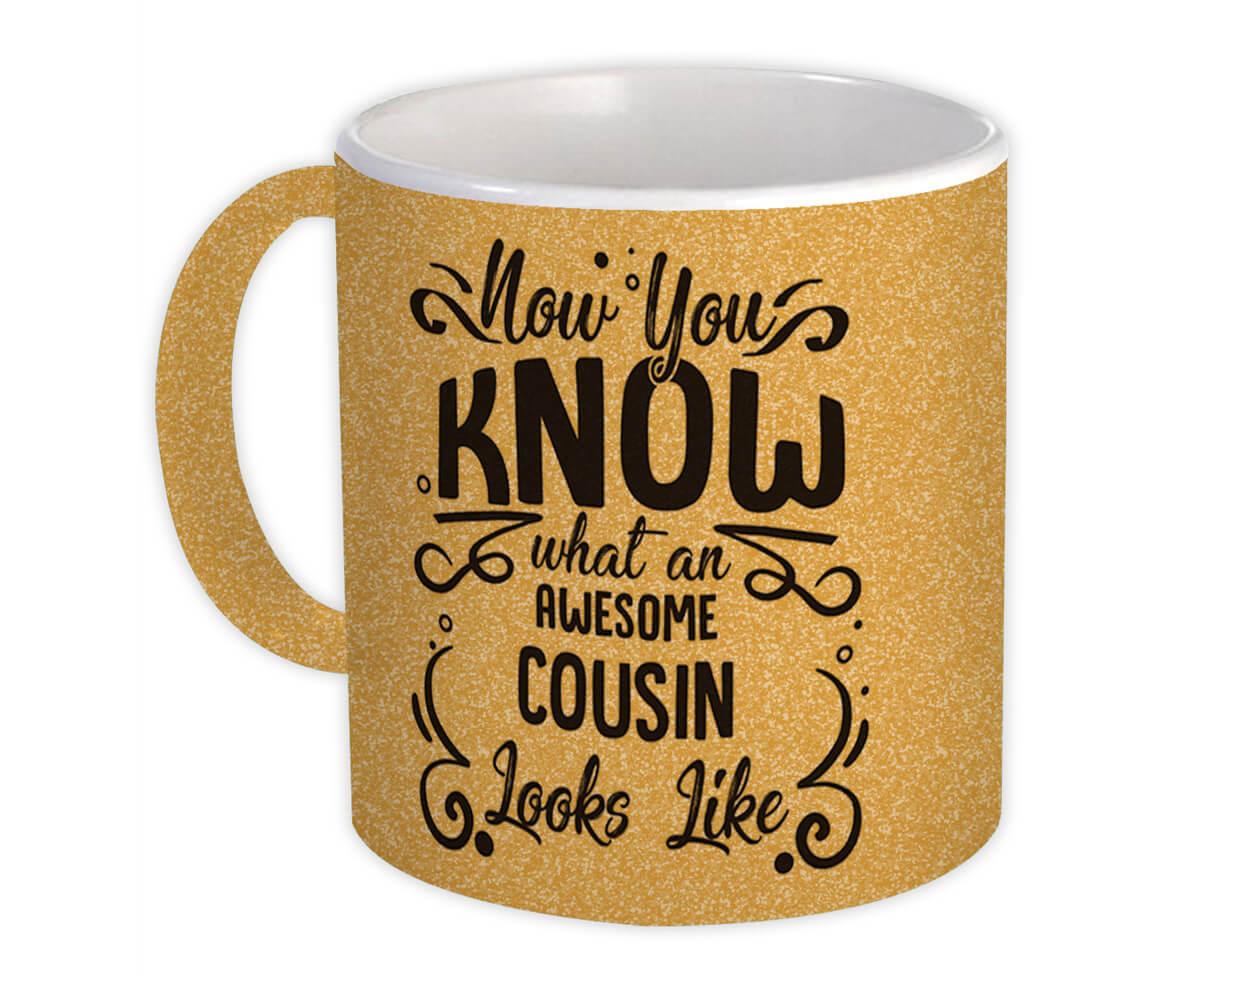 Details about   I Love you Cousin Gift Mug Birthday for Cousin Family Christmas 